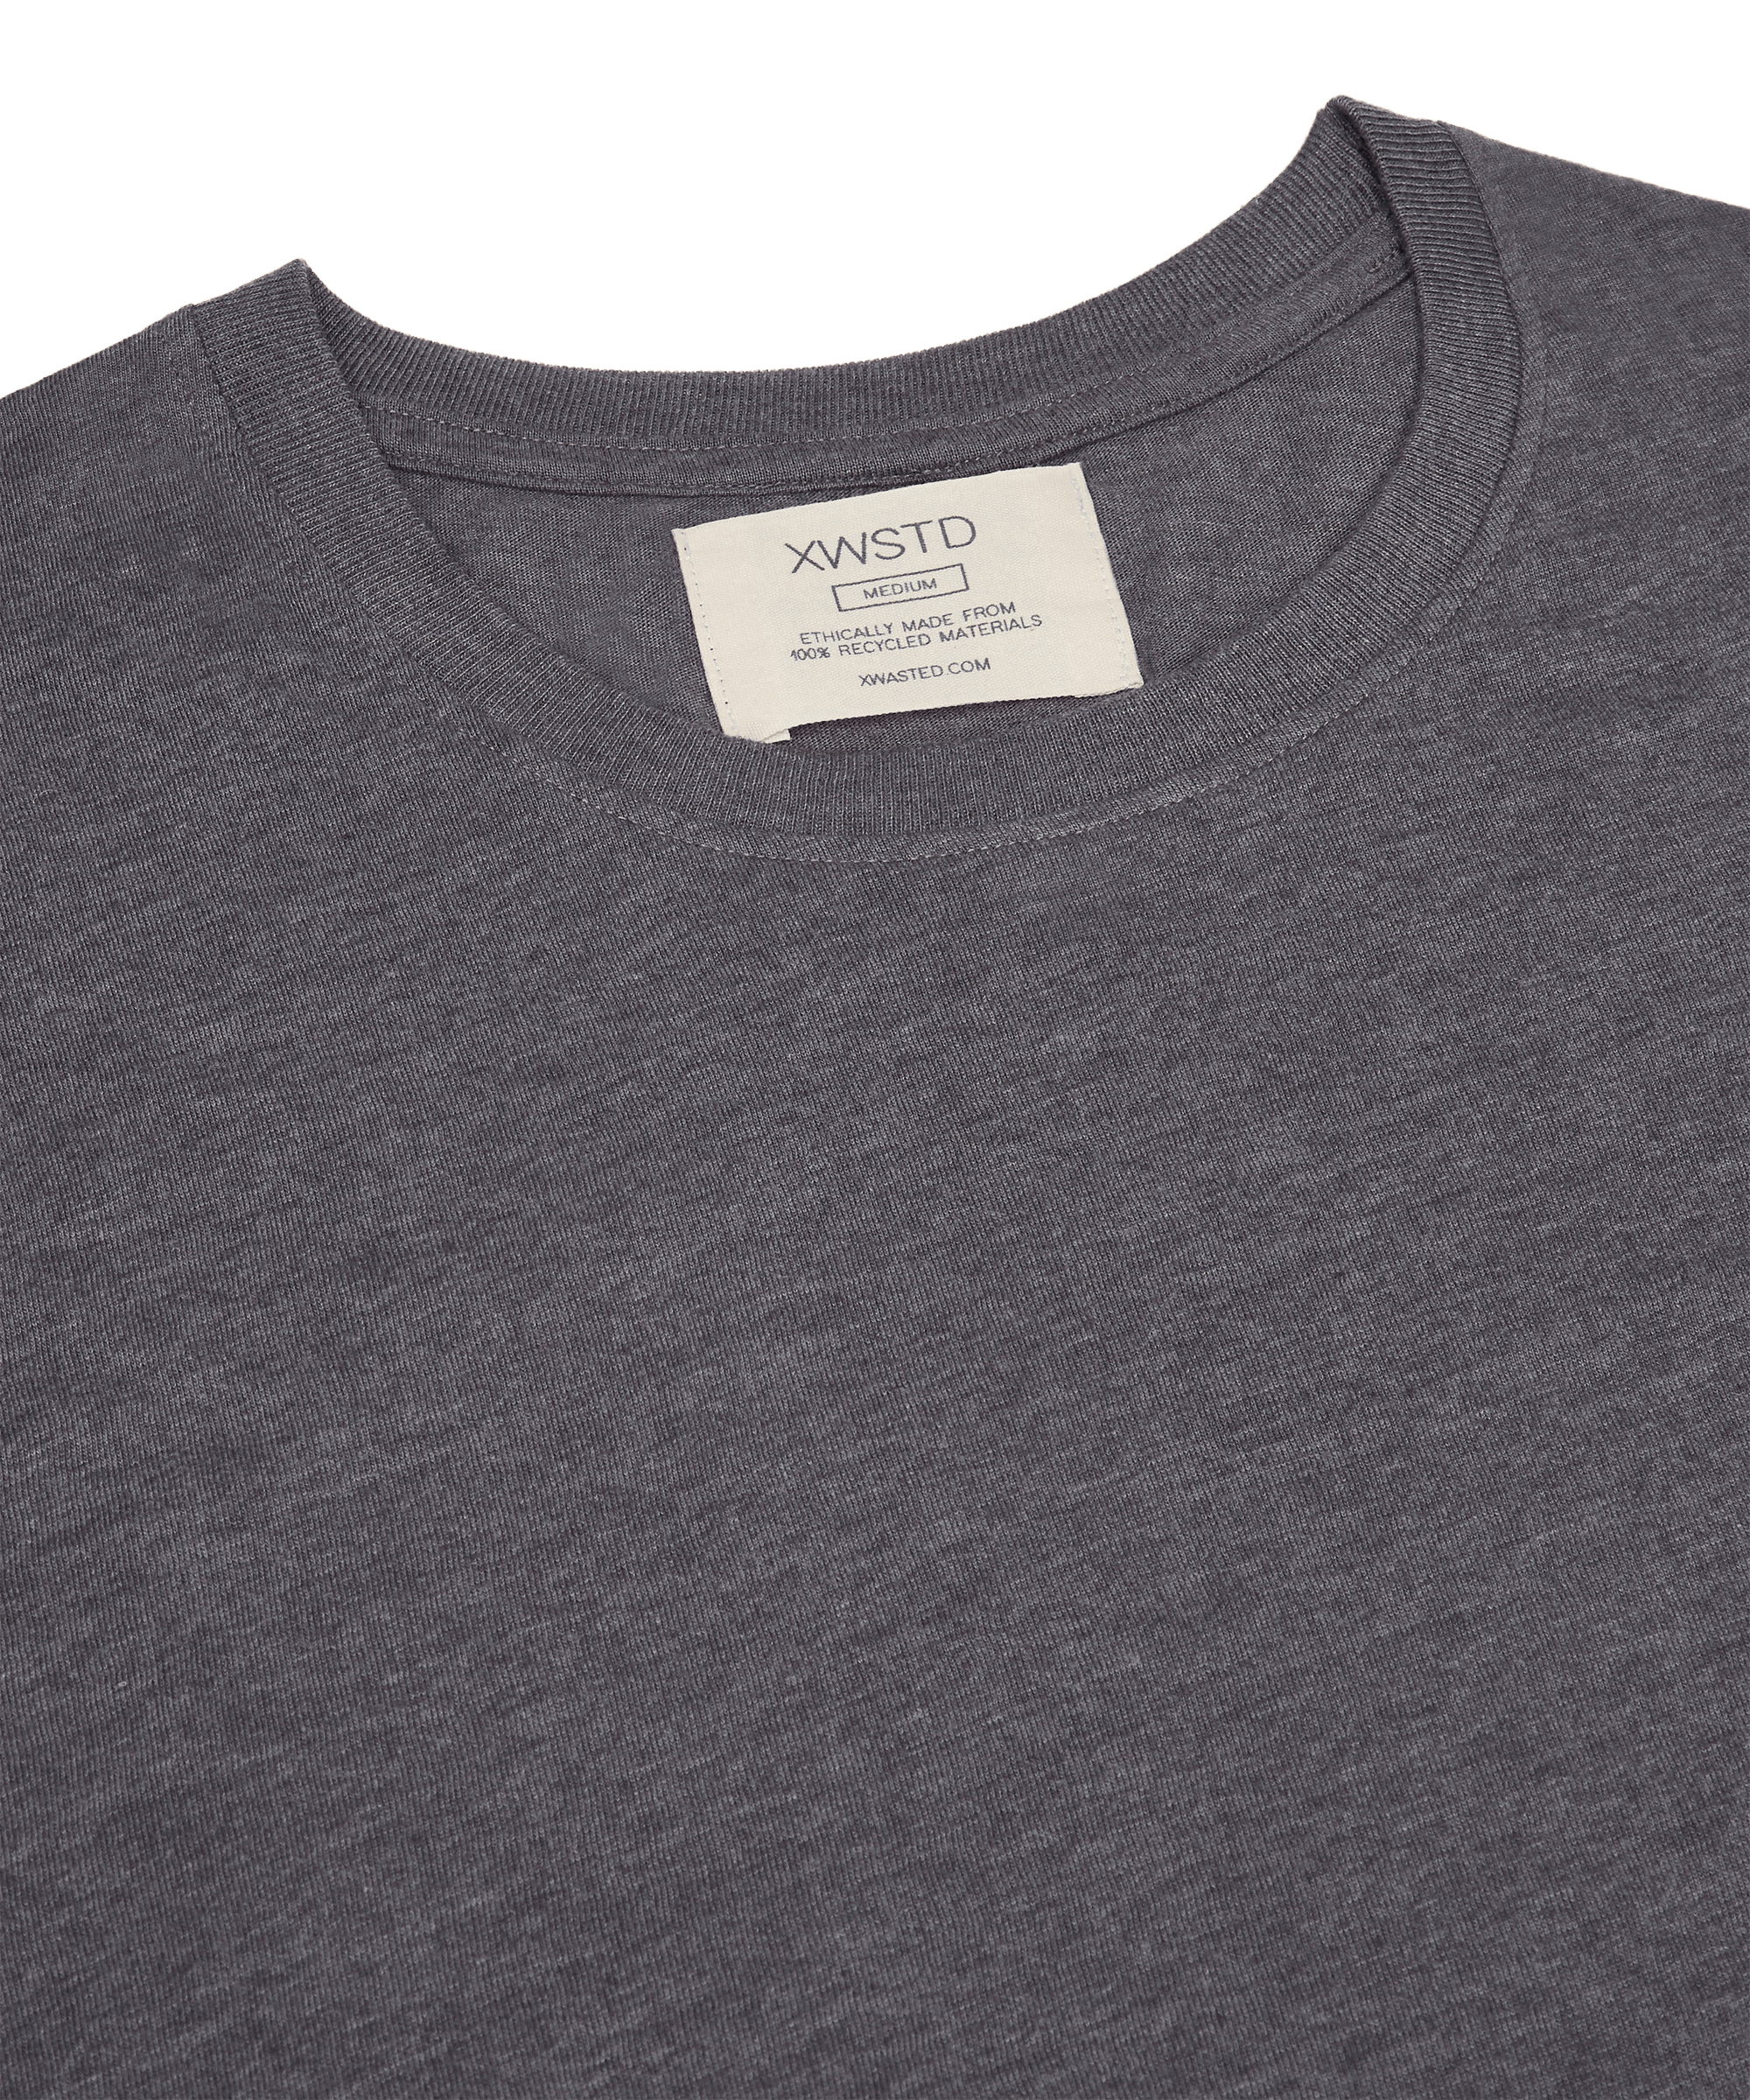 XWASTED neck label of faded grey organic 100% recycled t-shirt 